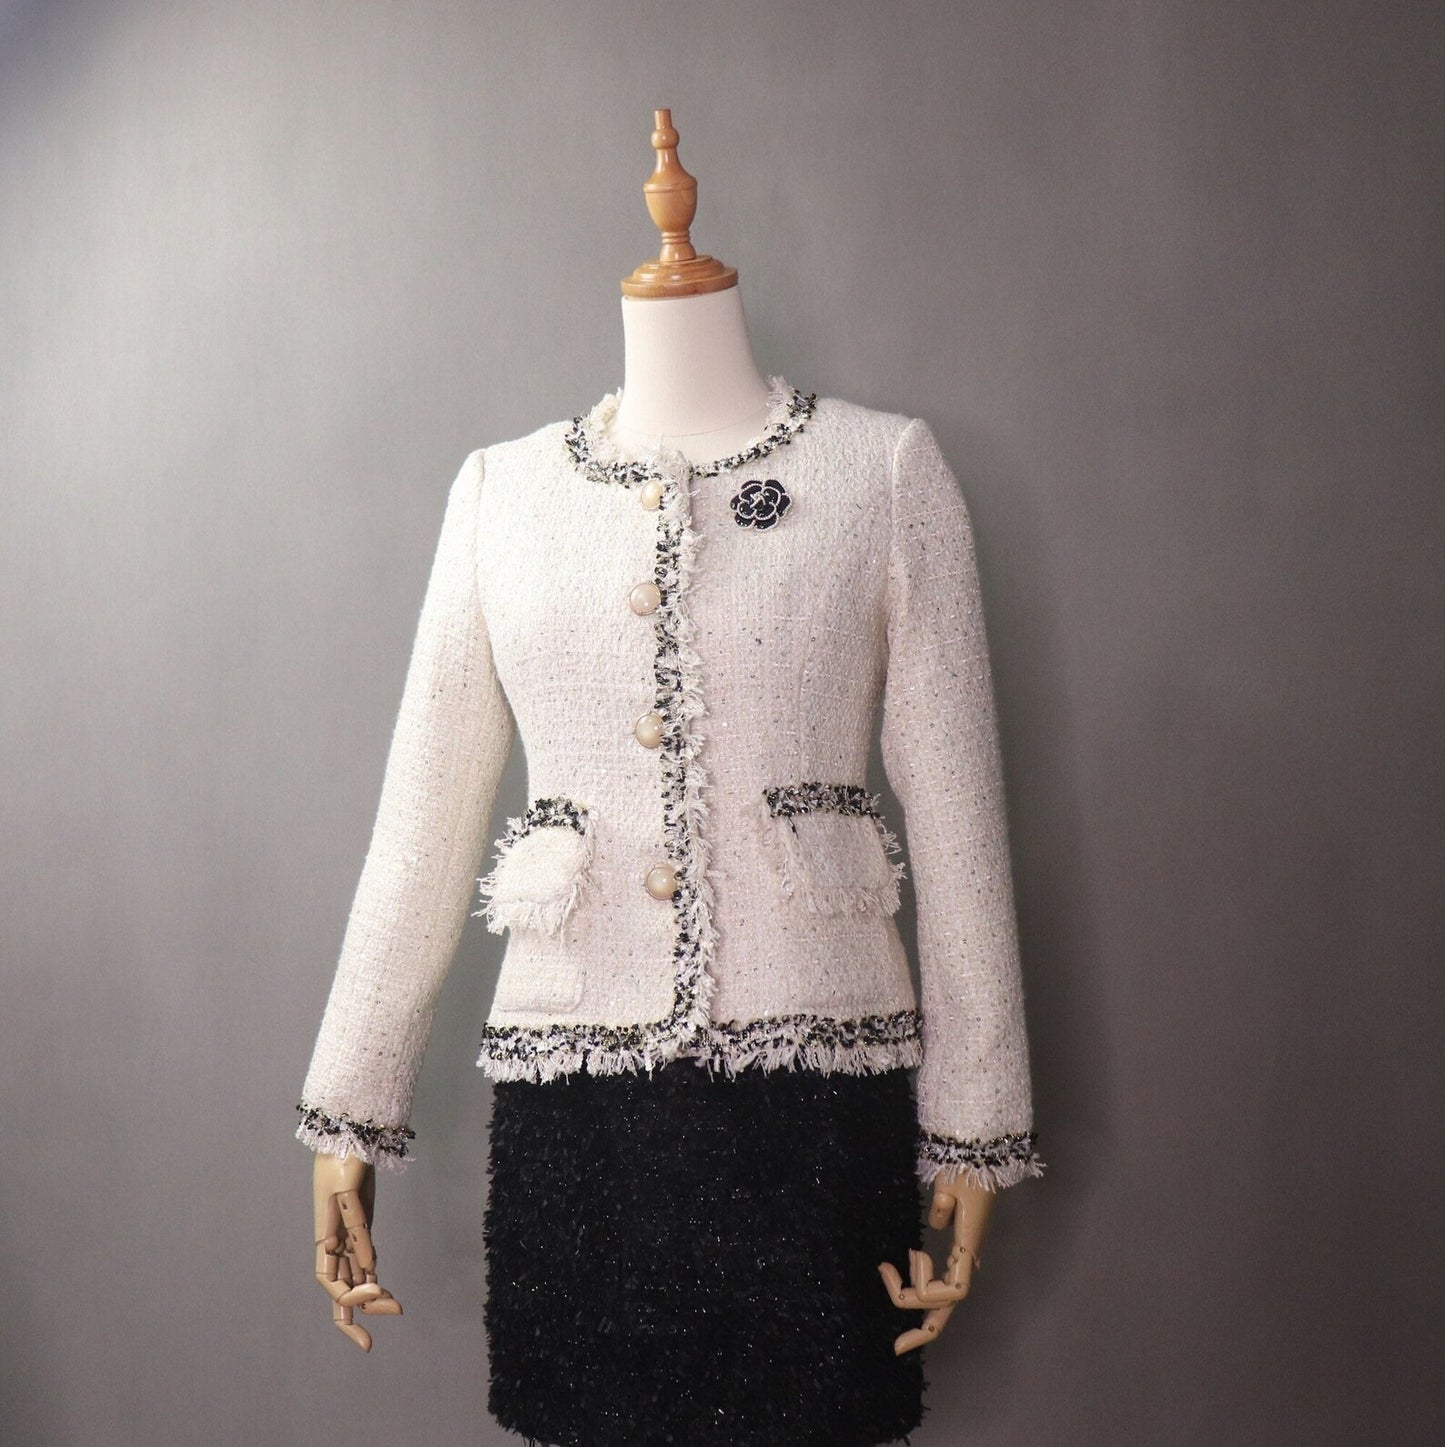 Pearl Buttons Fringe Cream Tweed Jacket Coat Blazer For Women's  UK CUSTOMER SERVICE!  Coat And Sheath dress sold separately.   Pearl Buttons Fringe Cream Tweed Jacket Coat Blazer - We offer Shorts, Skirts, Trousers for the suit. The coat is suits to any dress like sheath dress. Pearl buttons with tassel design. Our tailor will make as per customer requirement like with pocket, sleeveless, without pocket etc.